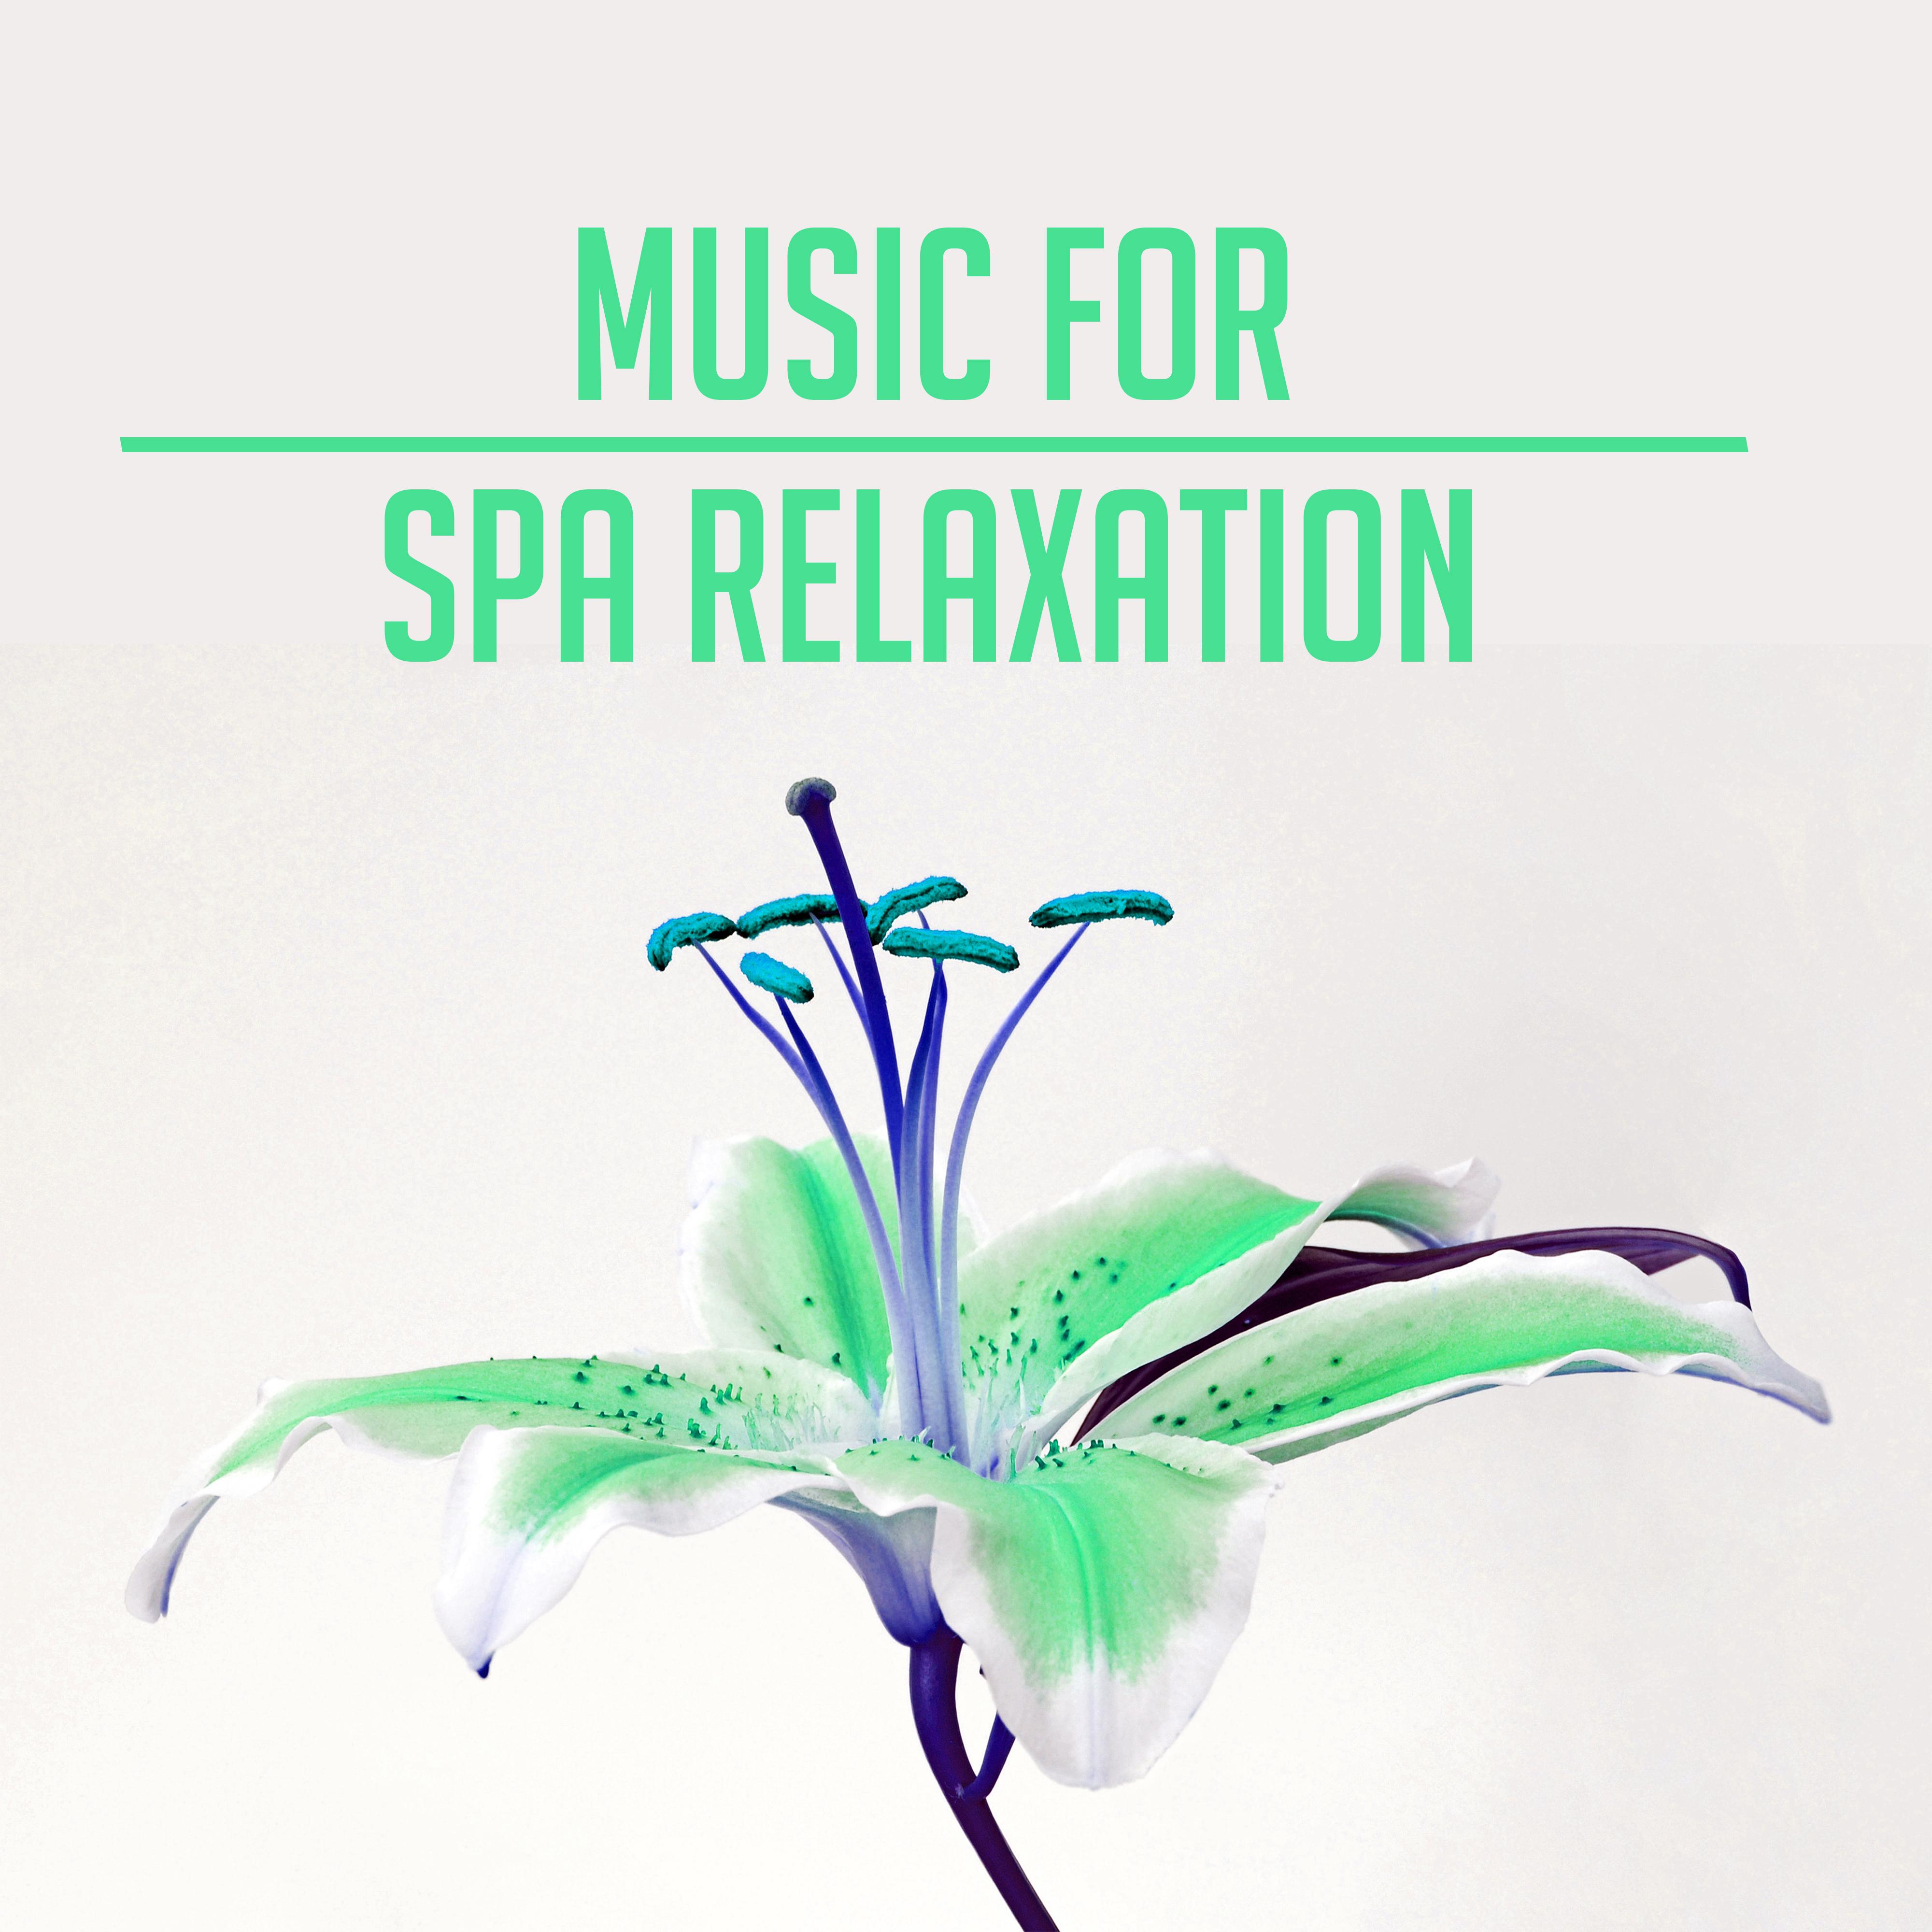 Music for Spa Relaxation – Soft Songs for Spa Hotel, Sensual Massage Music, Peaceful Waves, Calming Sounds